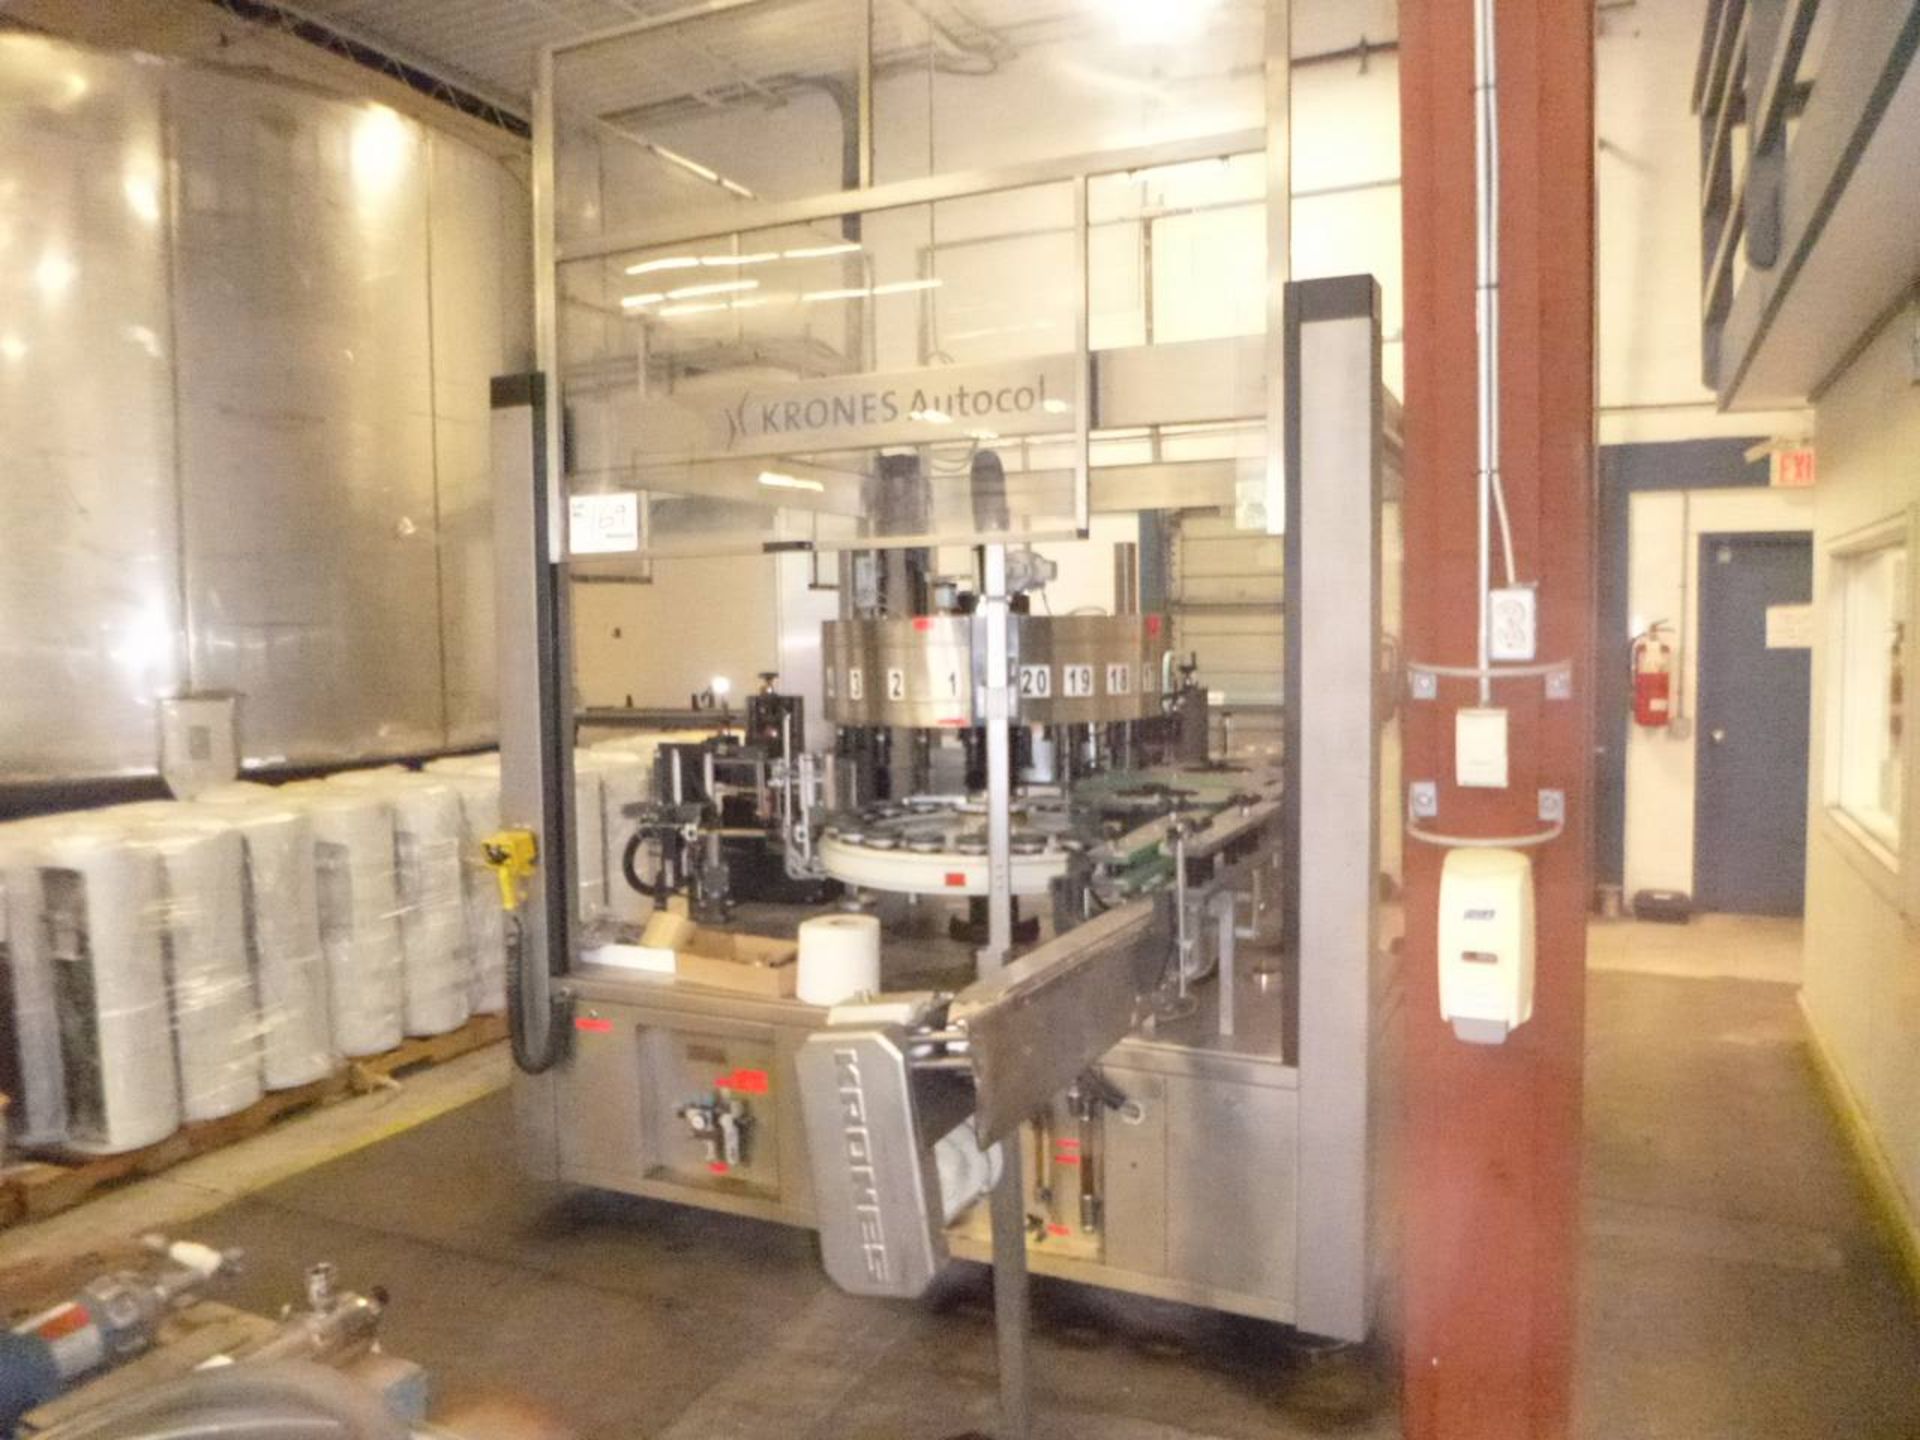 2002 Krones 960-20 Autocol Labelling system - Image 12 of 17